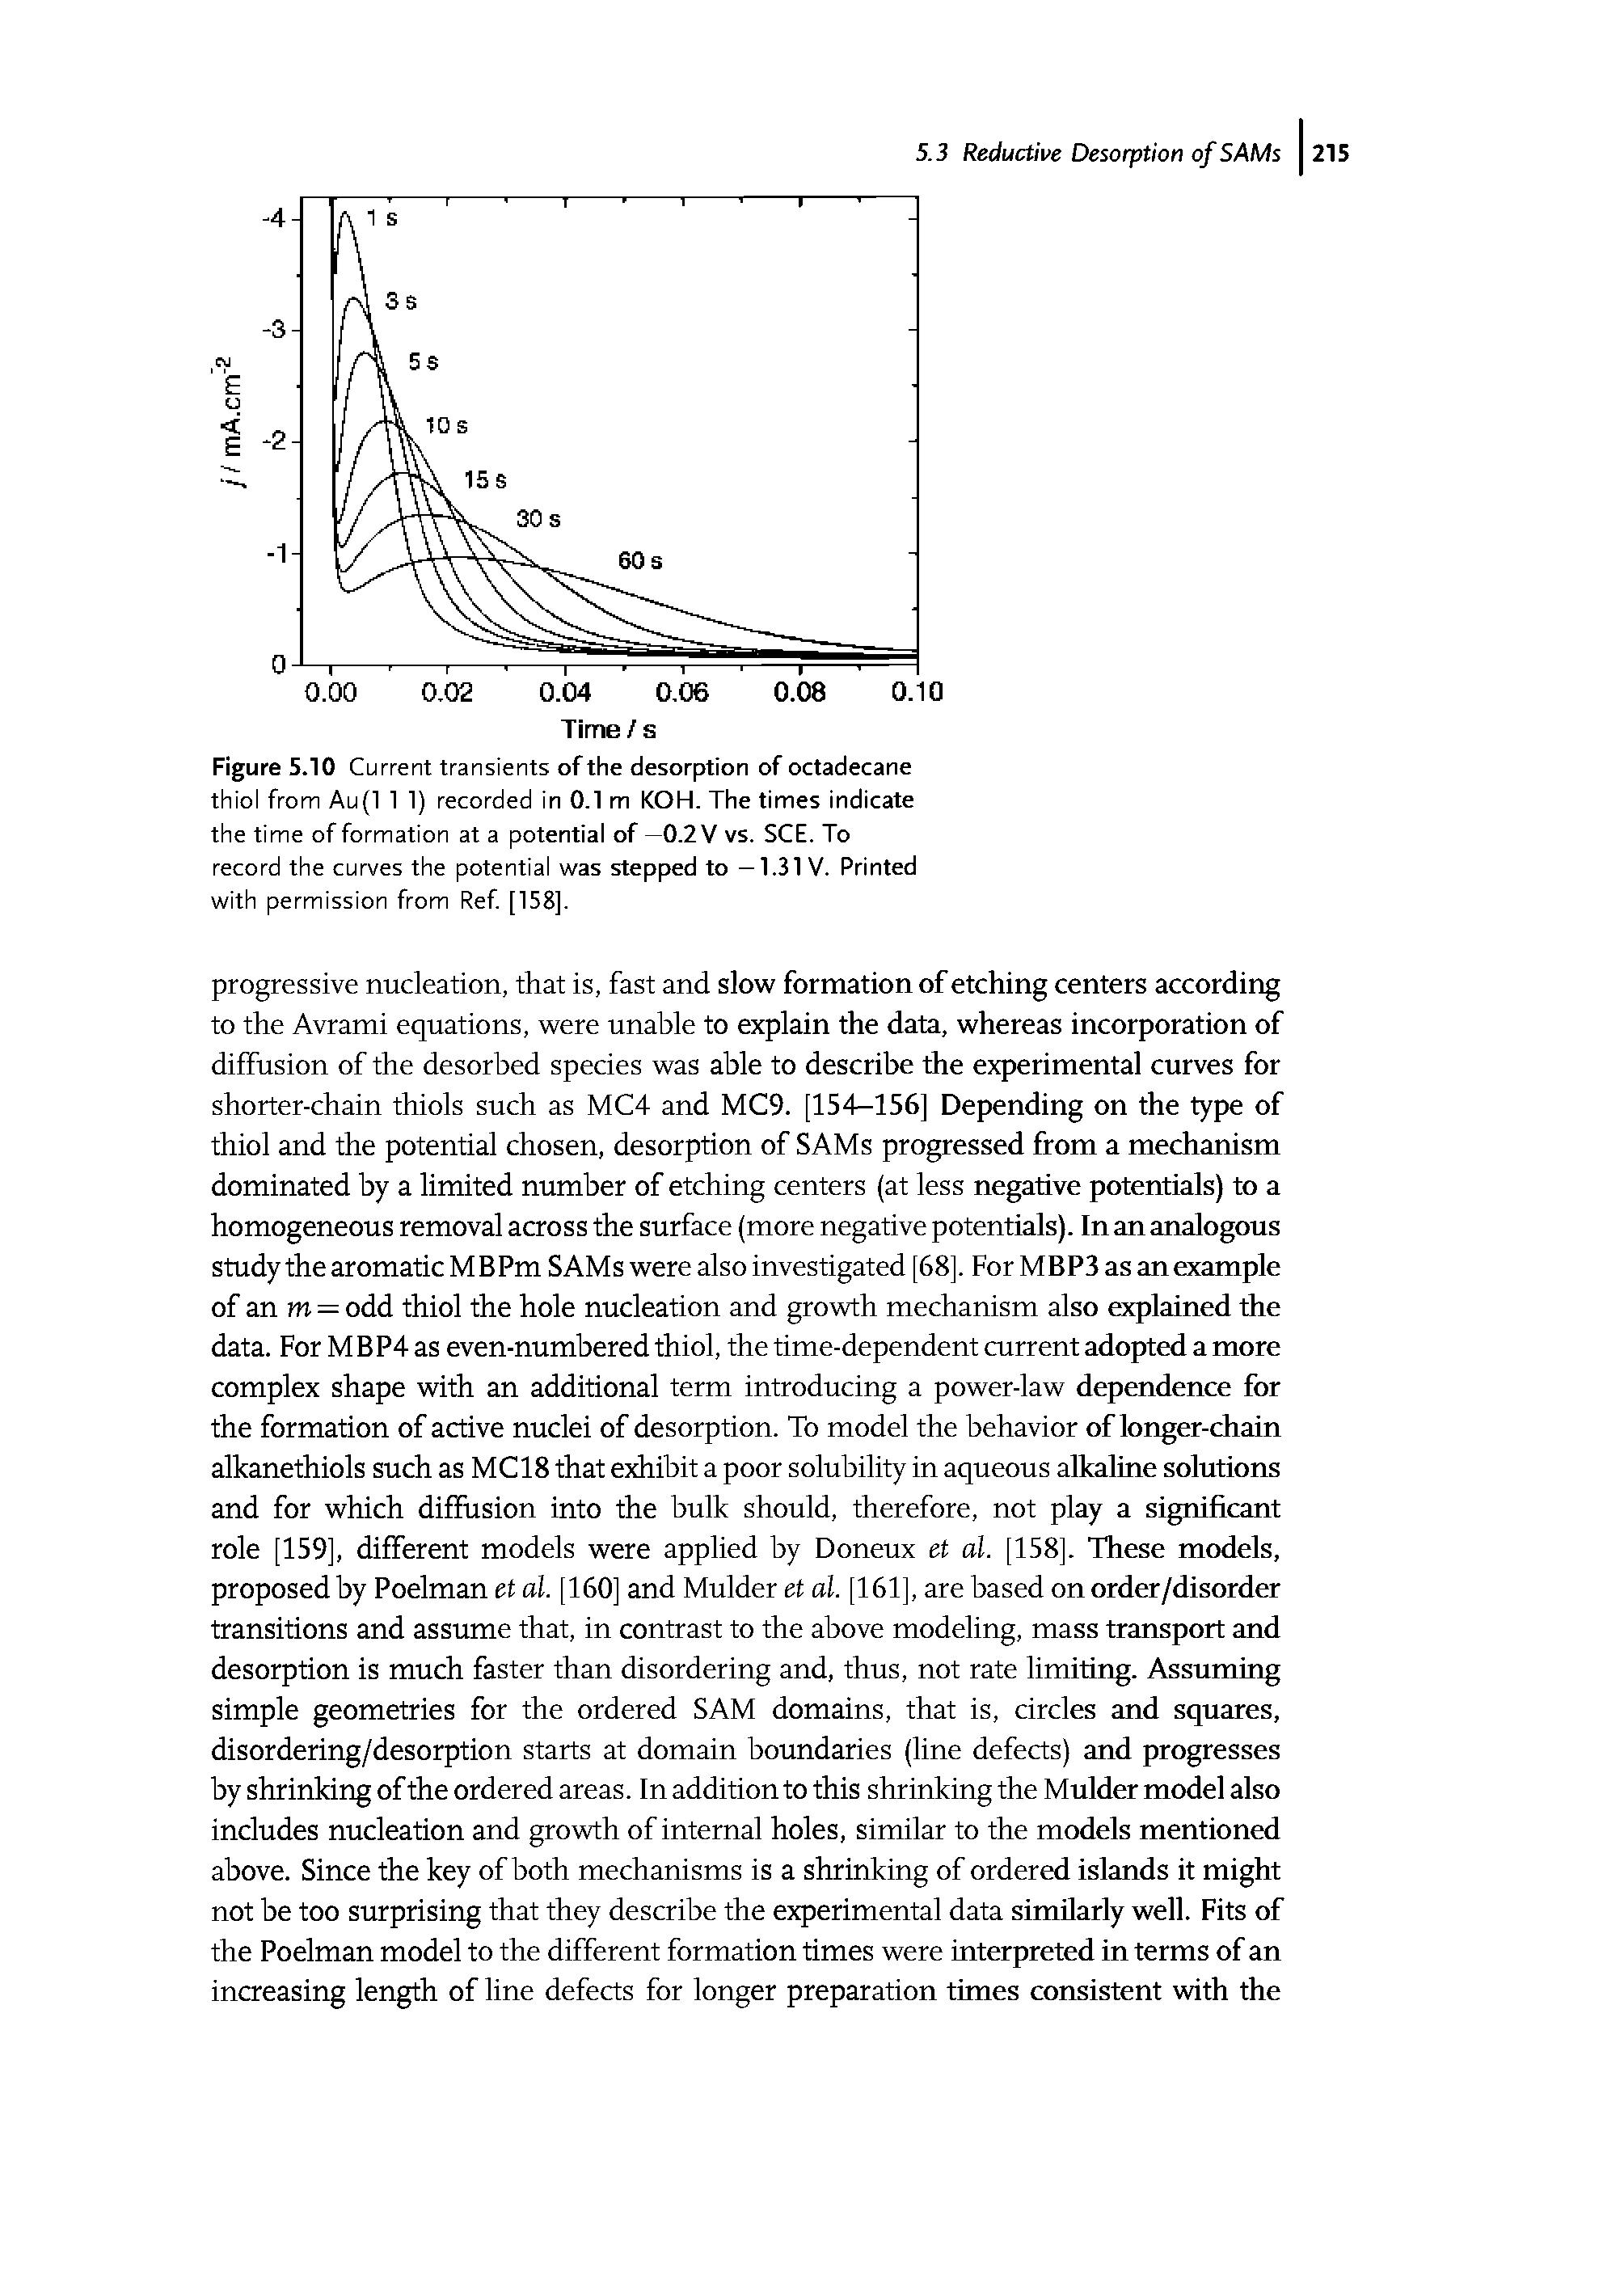 Figure 5.10 Current transients of the desorption of octadecane thiol from Au(l 1 1) recorded in 0.1 m KOH. The times indicate the time of formation at a potential of —0.2 V vs. SCE. To record the curves the potential was stepped to —1.31 V. Printed with permission from Ref [158].